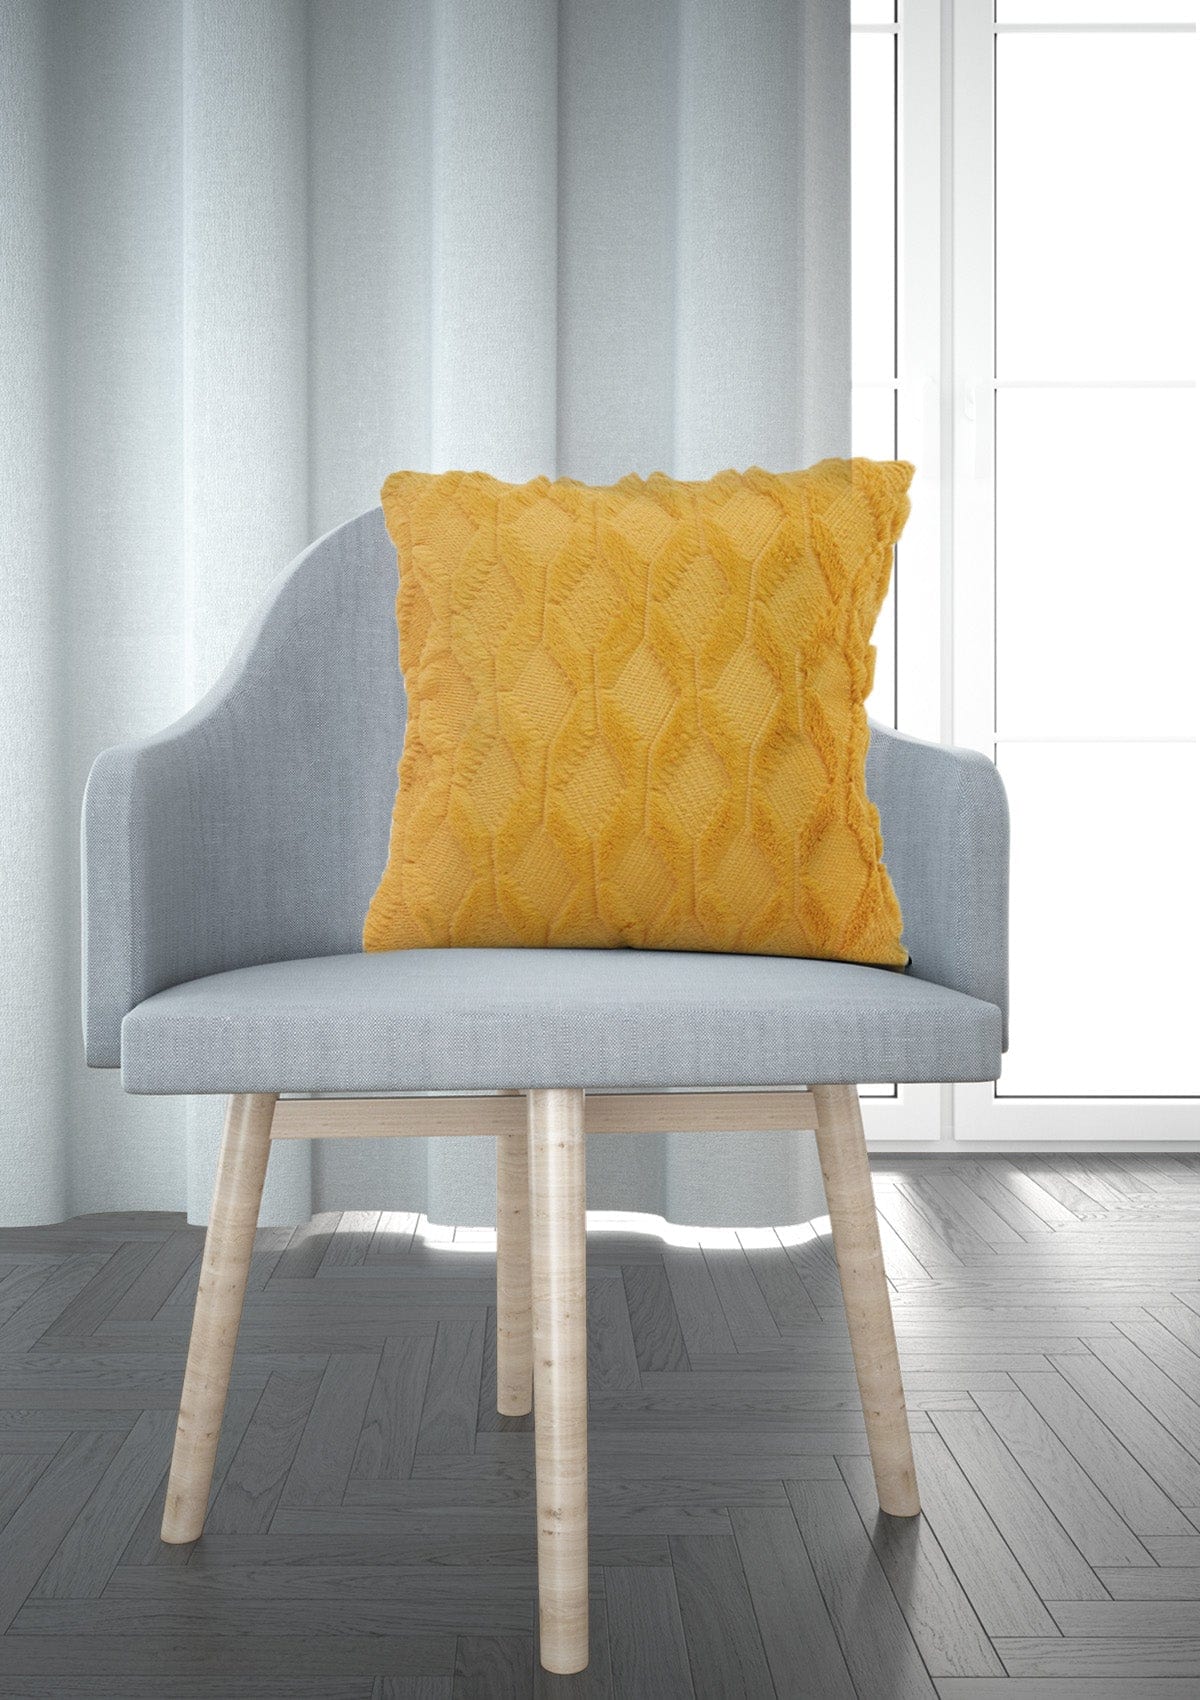 Yellow Fluffy Cushion Covers | CovermyCushion 30x50cm / Yellow / No thanks - cover only